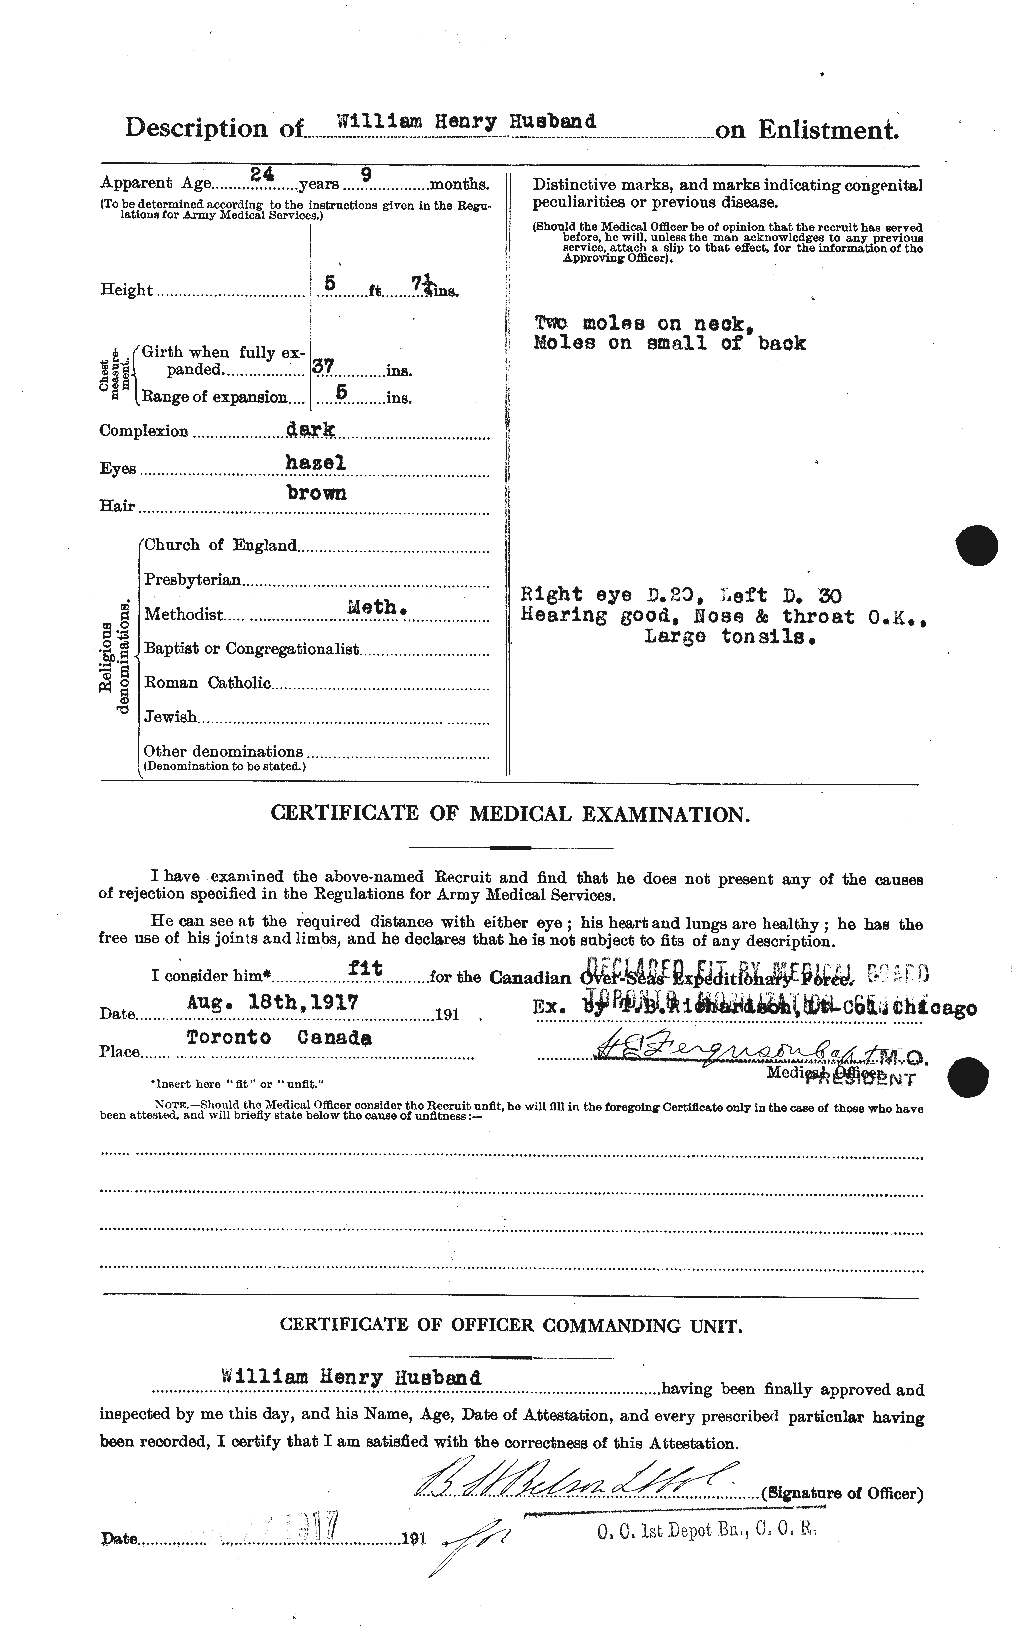 Personnel Records of the First World War - CEF 405255b